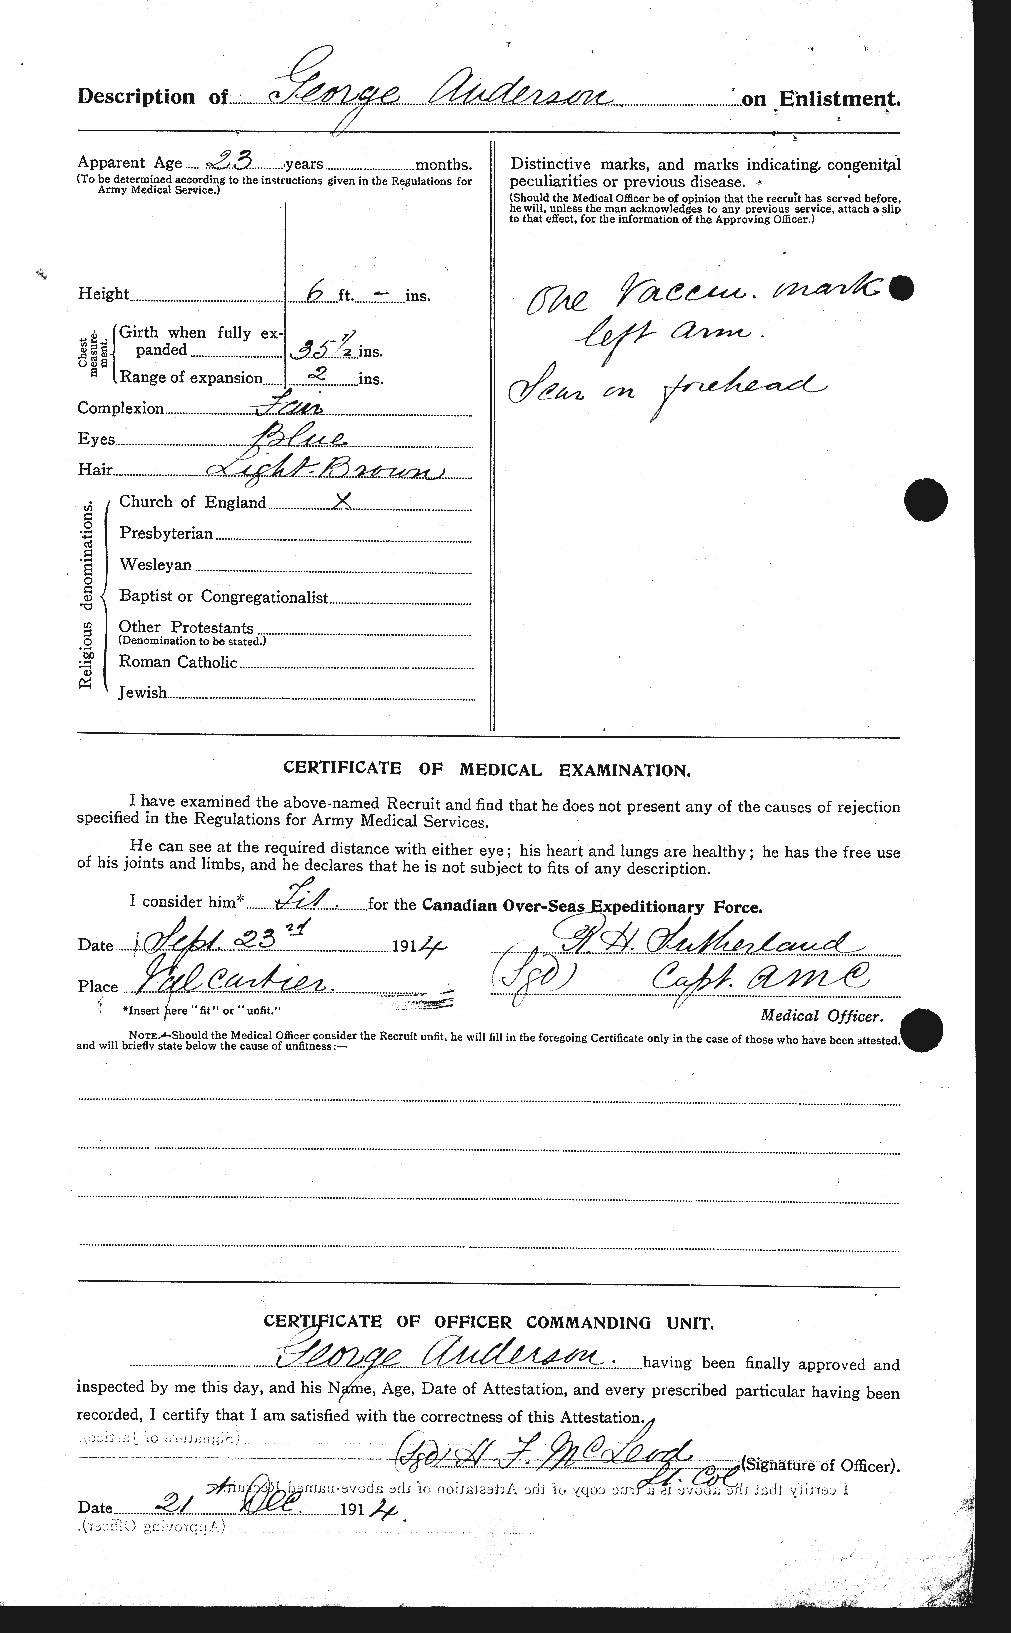 Personnel Records of the First World War - CEF 209757b